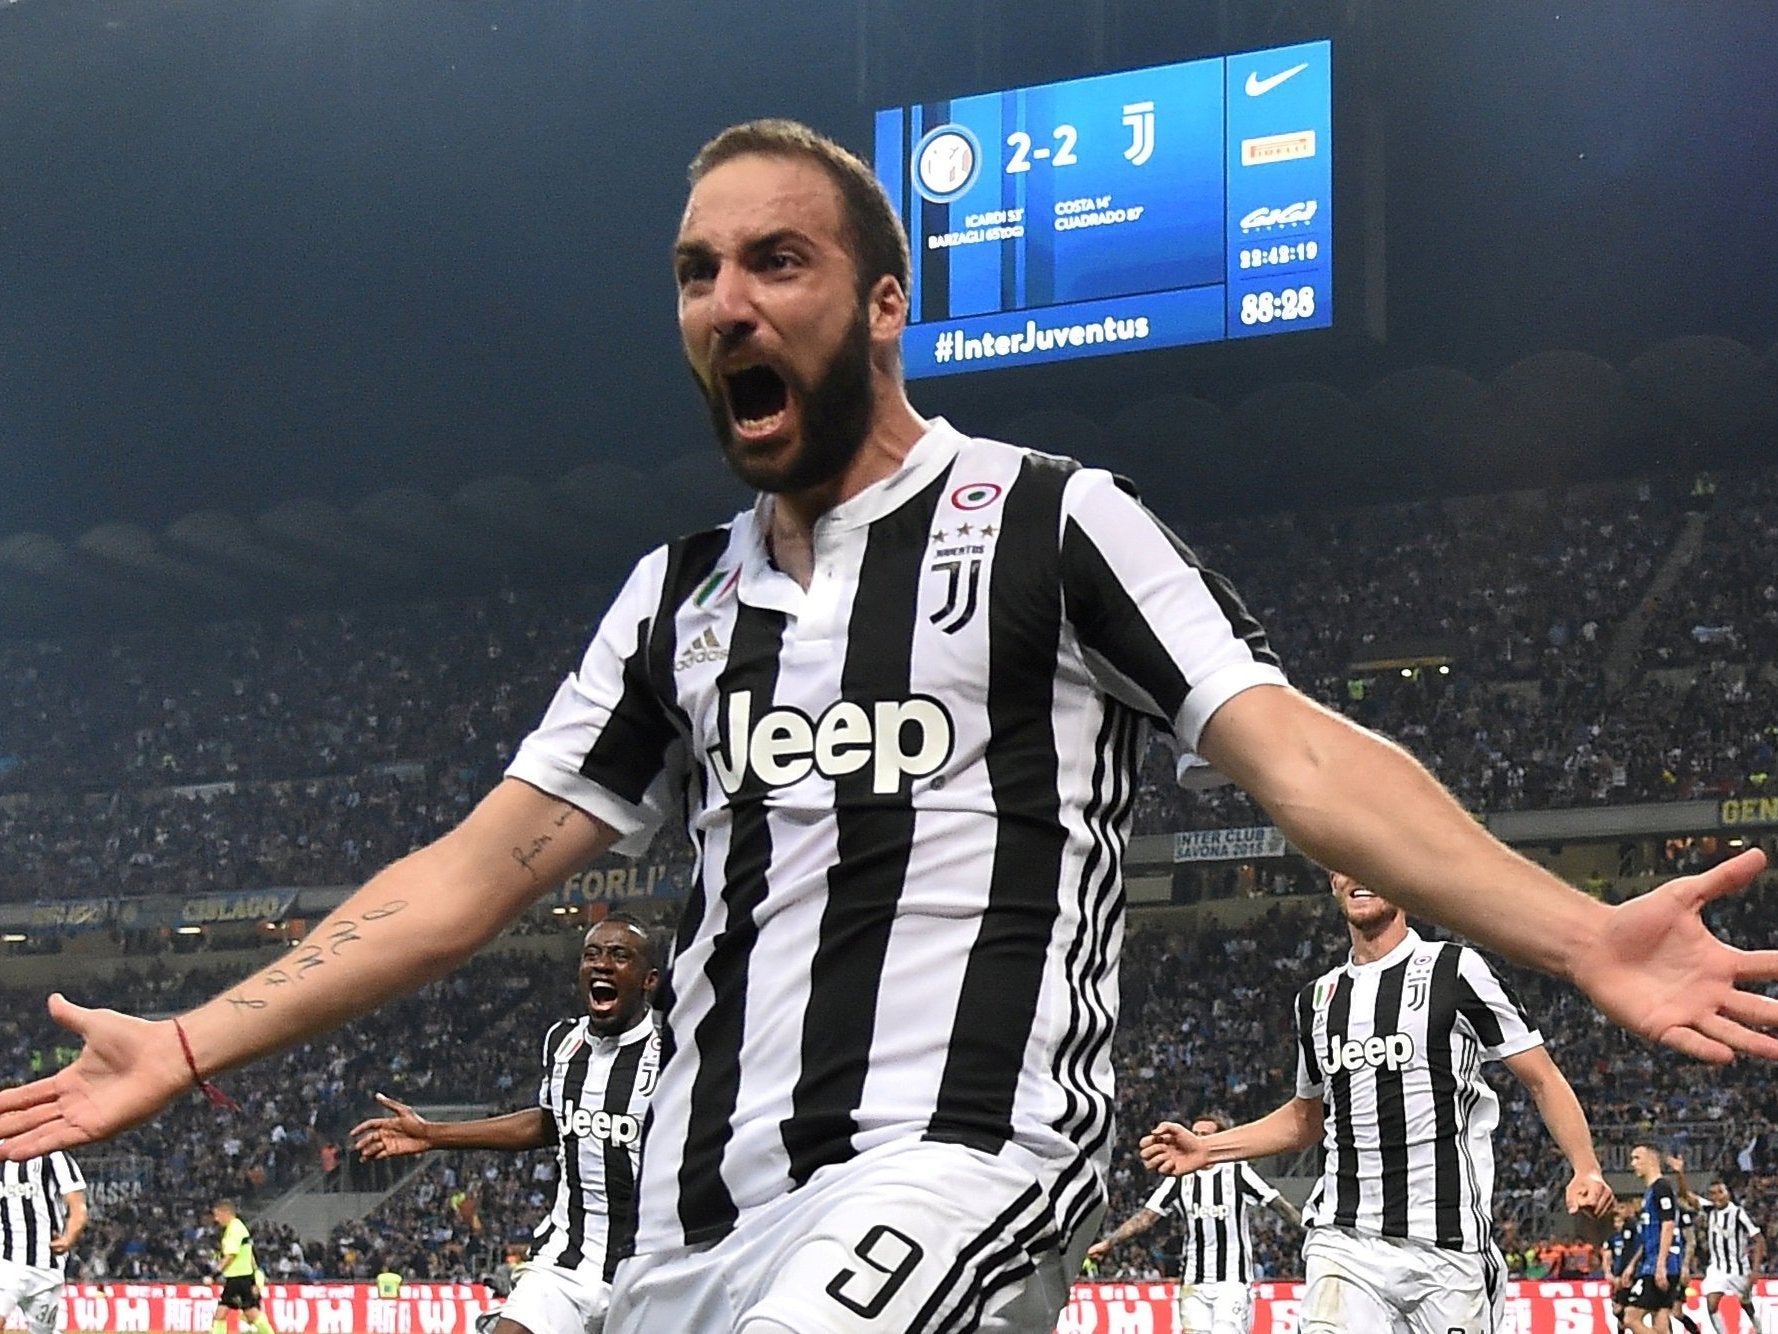 Juventus considering the sale of Gonzalo Higuain following Cristiano Ronaldo arrival, club chief confirms